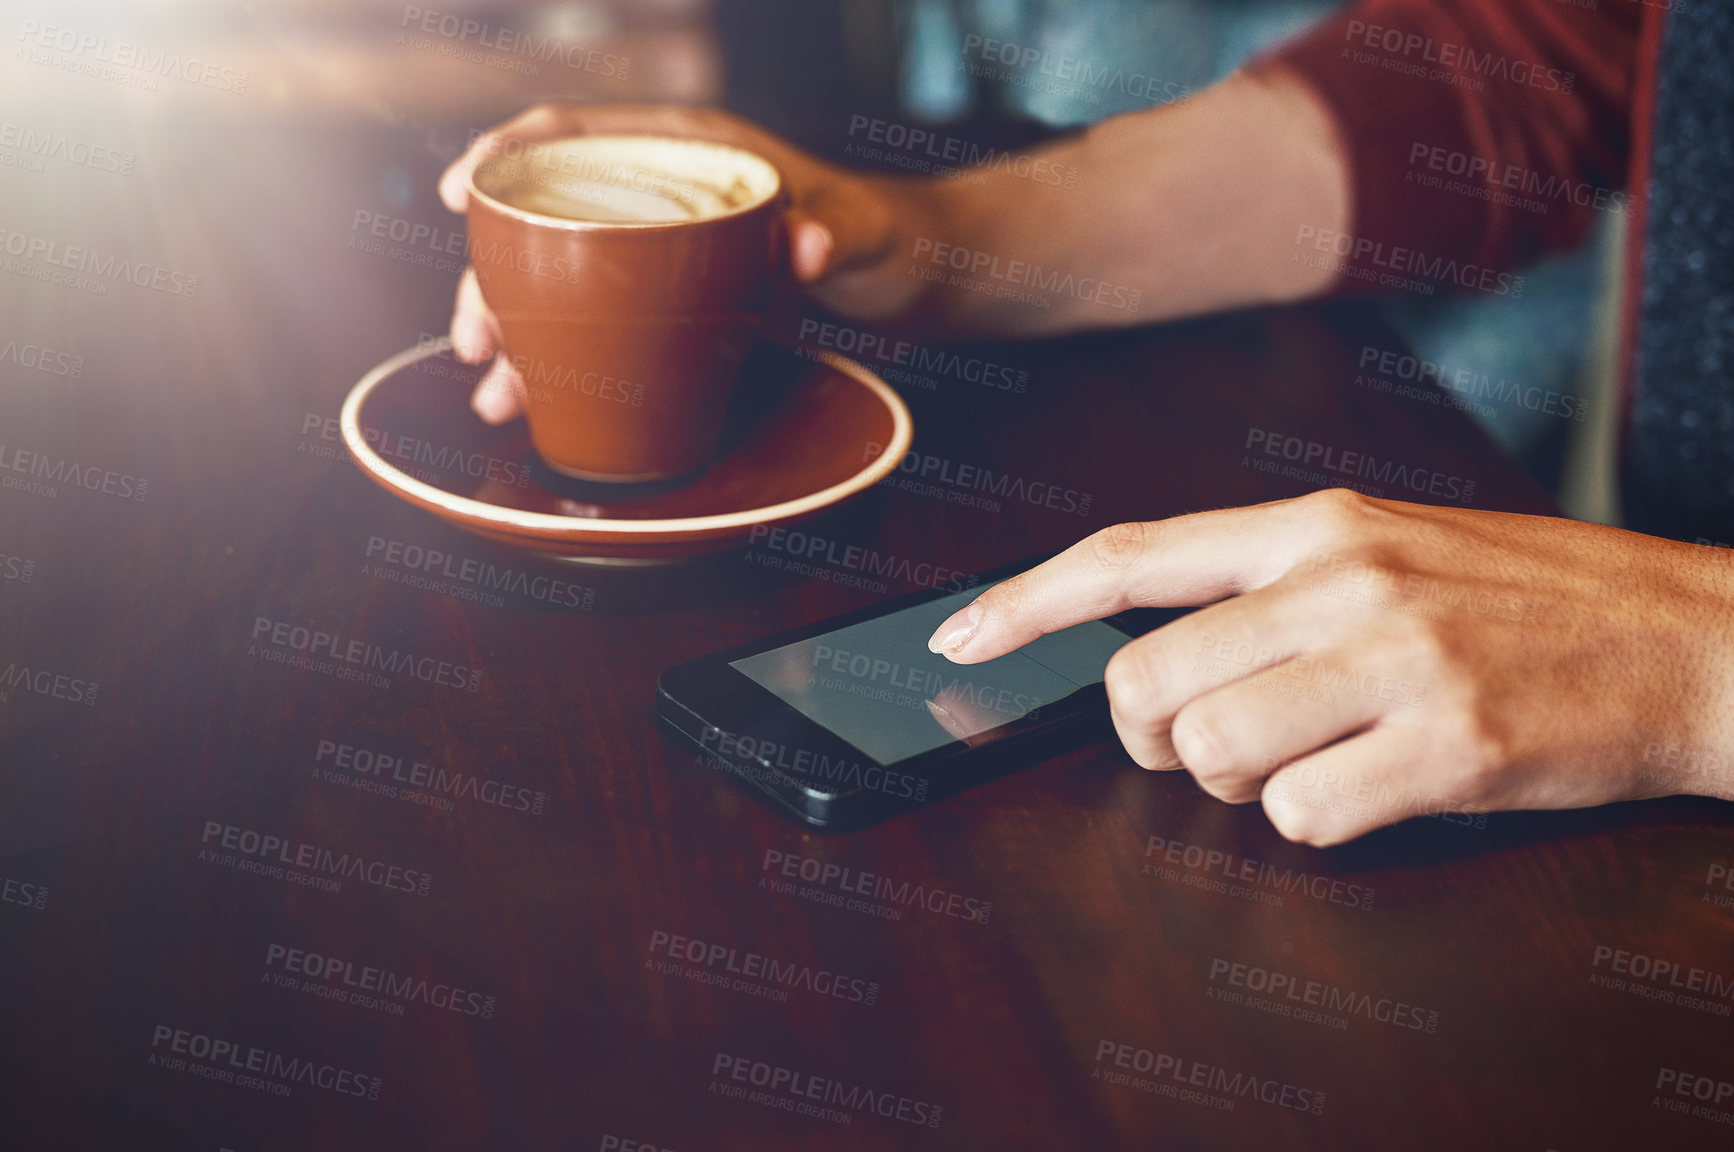 Buy stock photo Closeup shot of an unidentifiable woman enjoying a cup of coffee while using her phone in a cafe